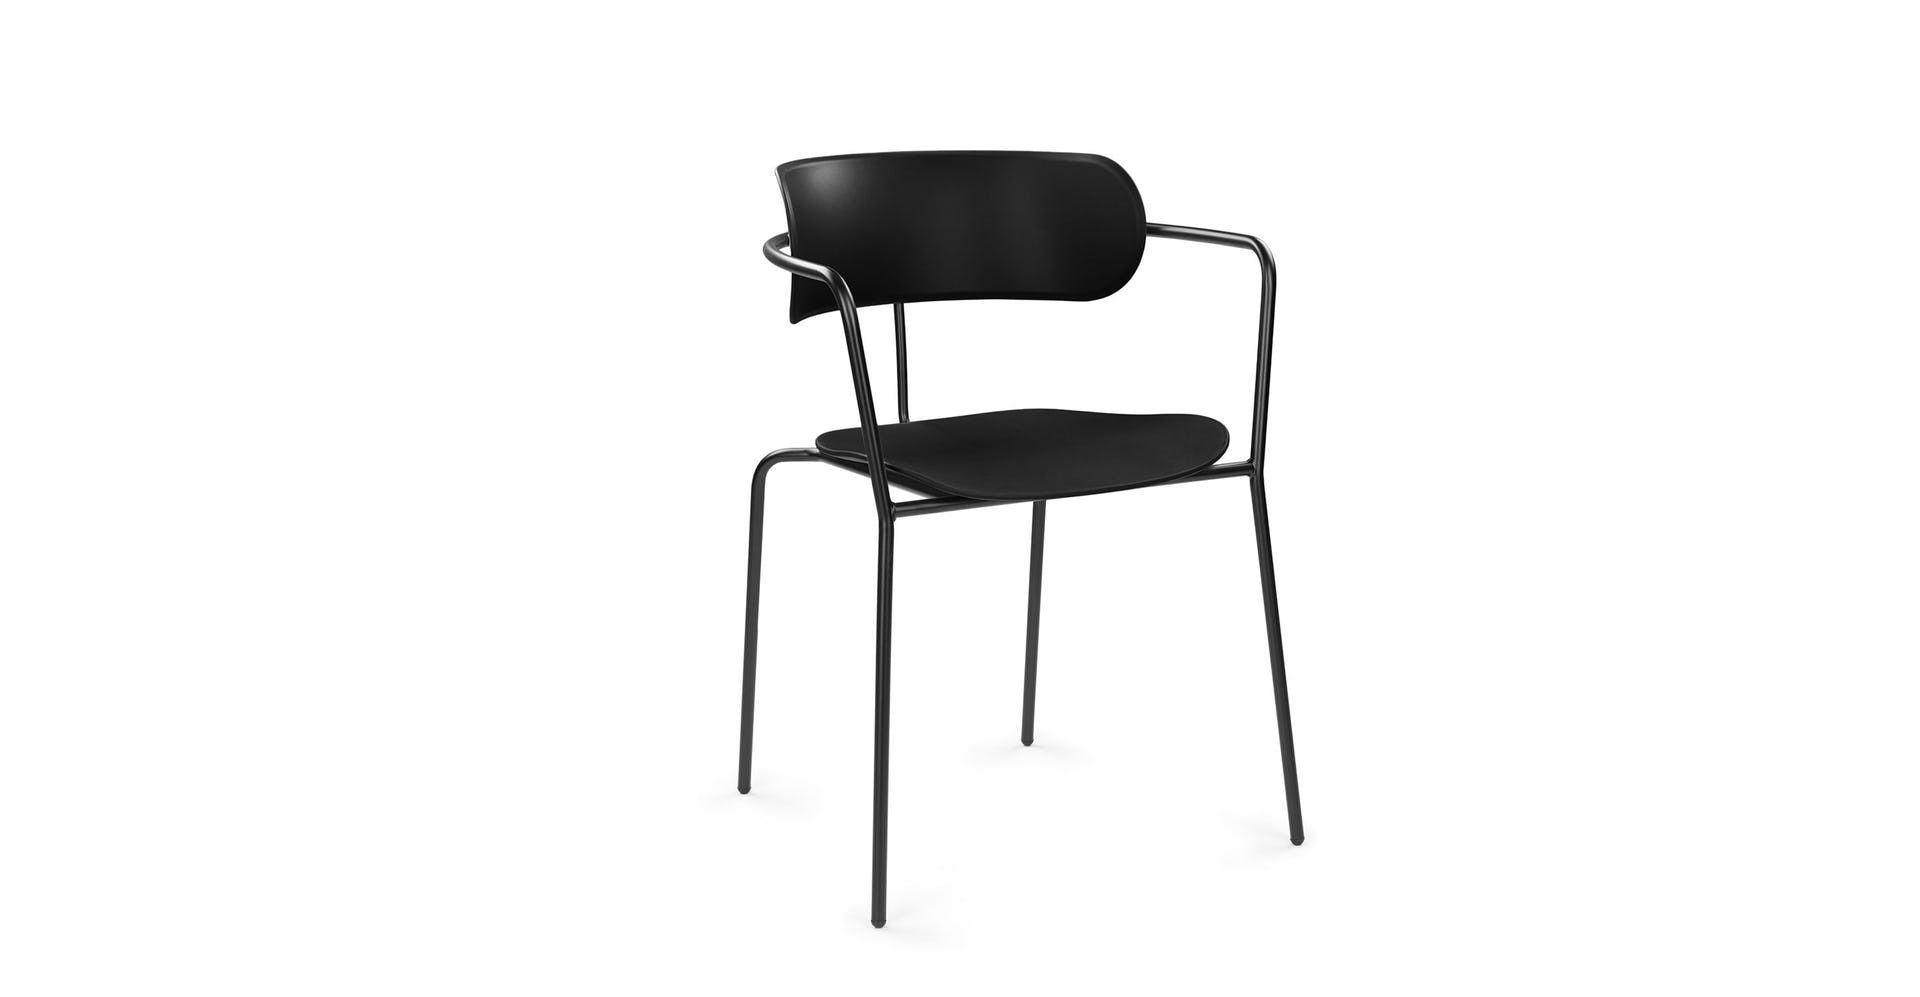 Modern Colibri Chair The Sleek and Stylish Seating Solution for Any Space